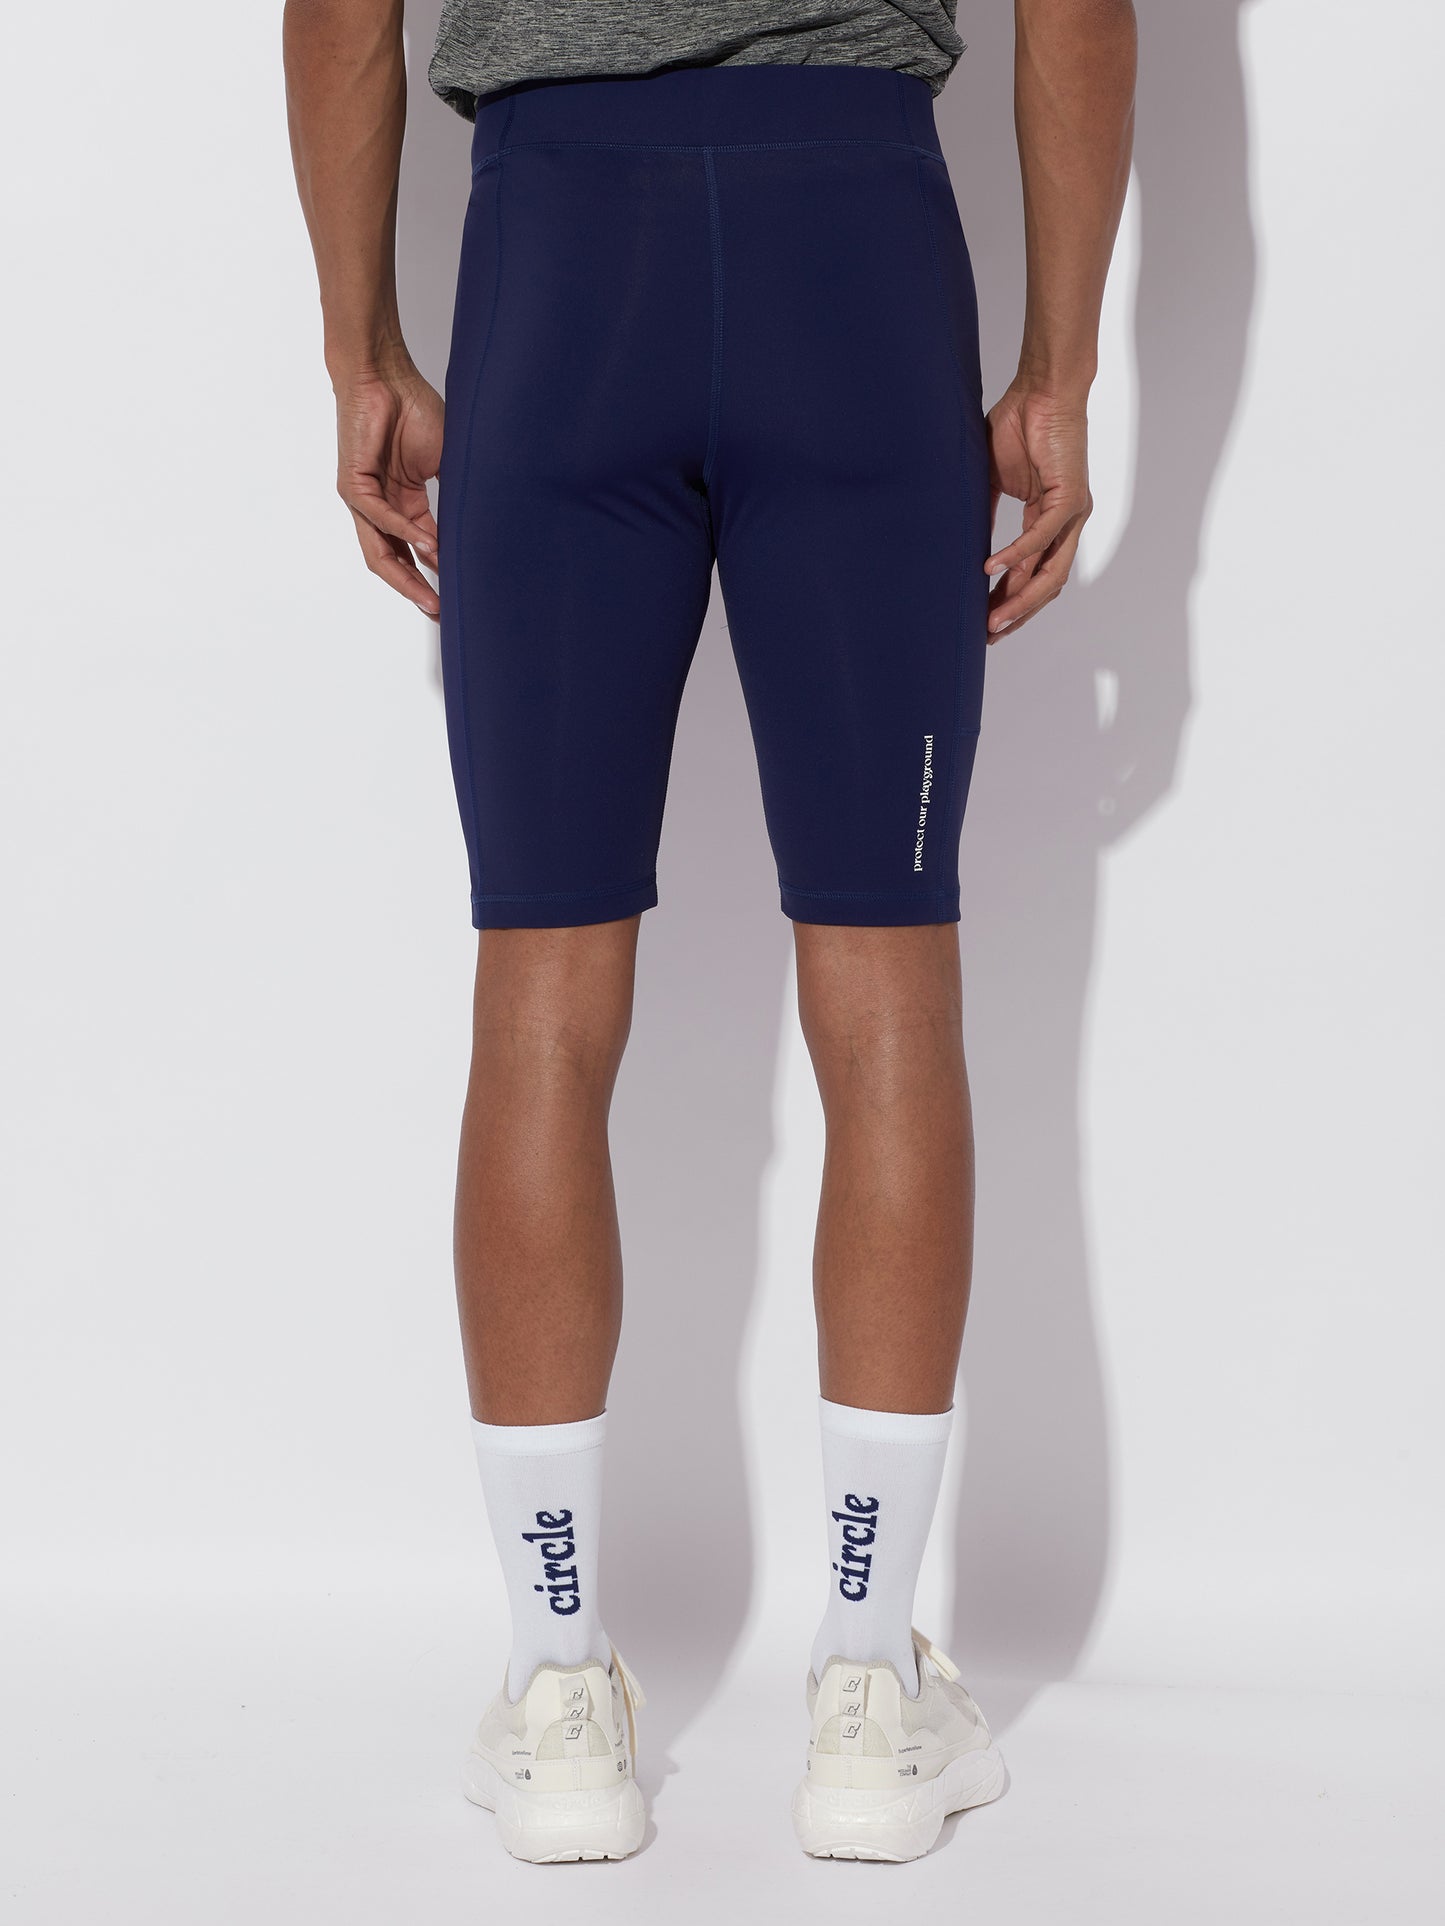 Hit The Road Compression Shorts